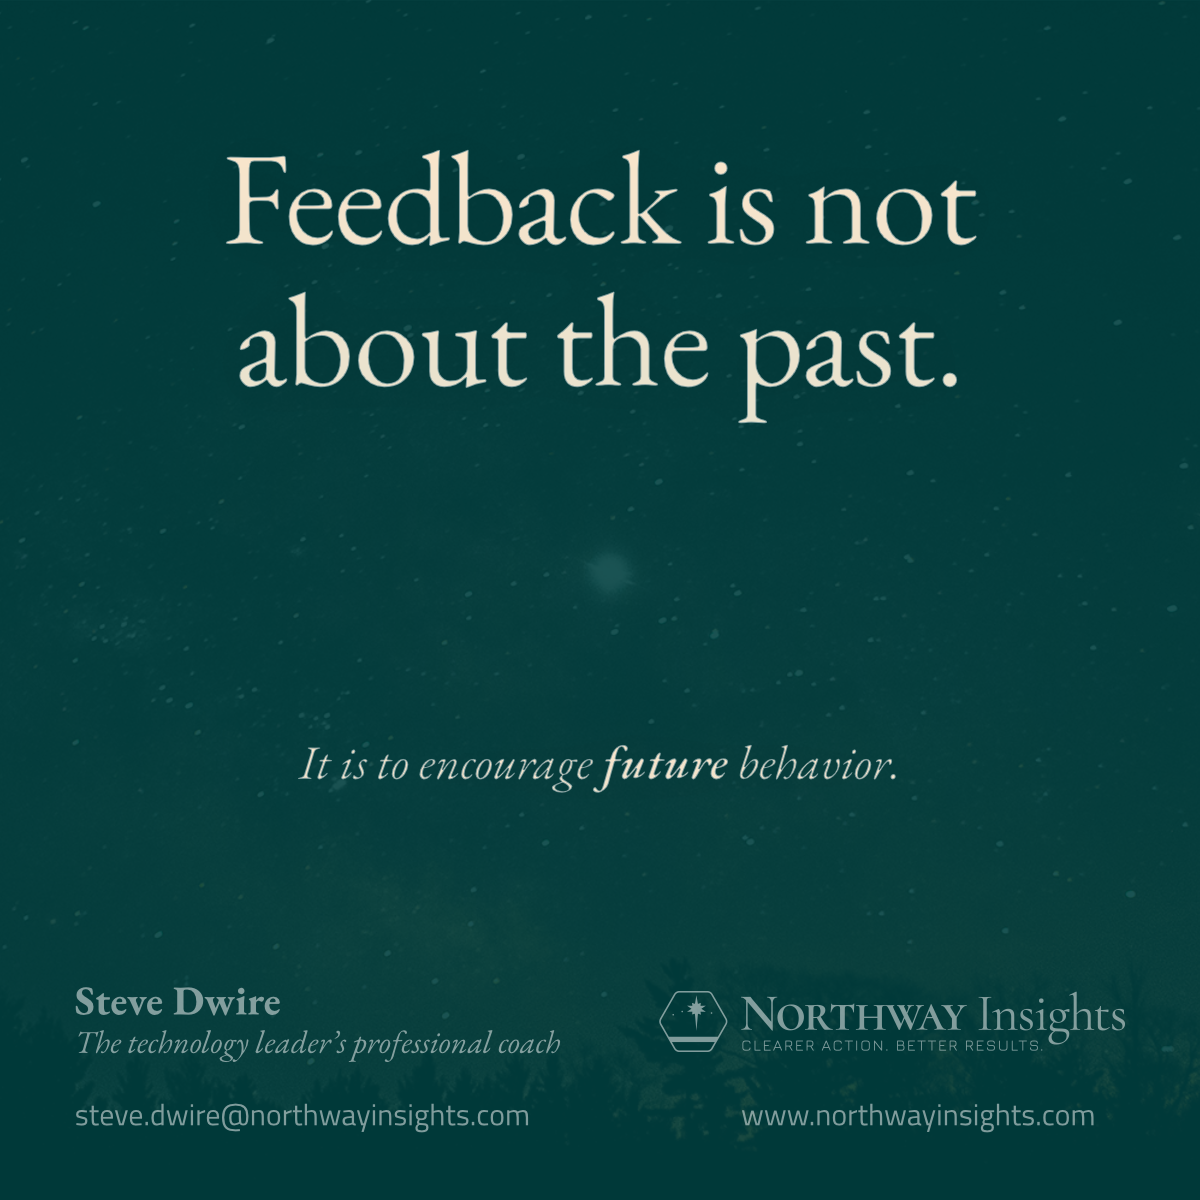 Feedback is not about the past